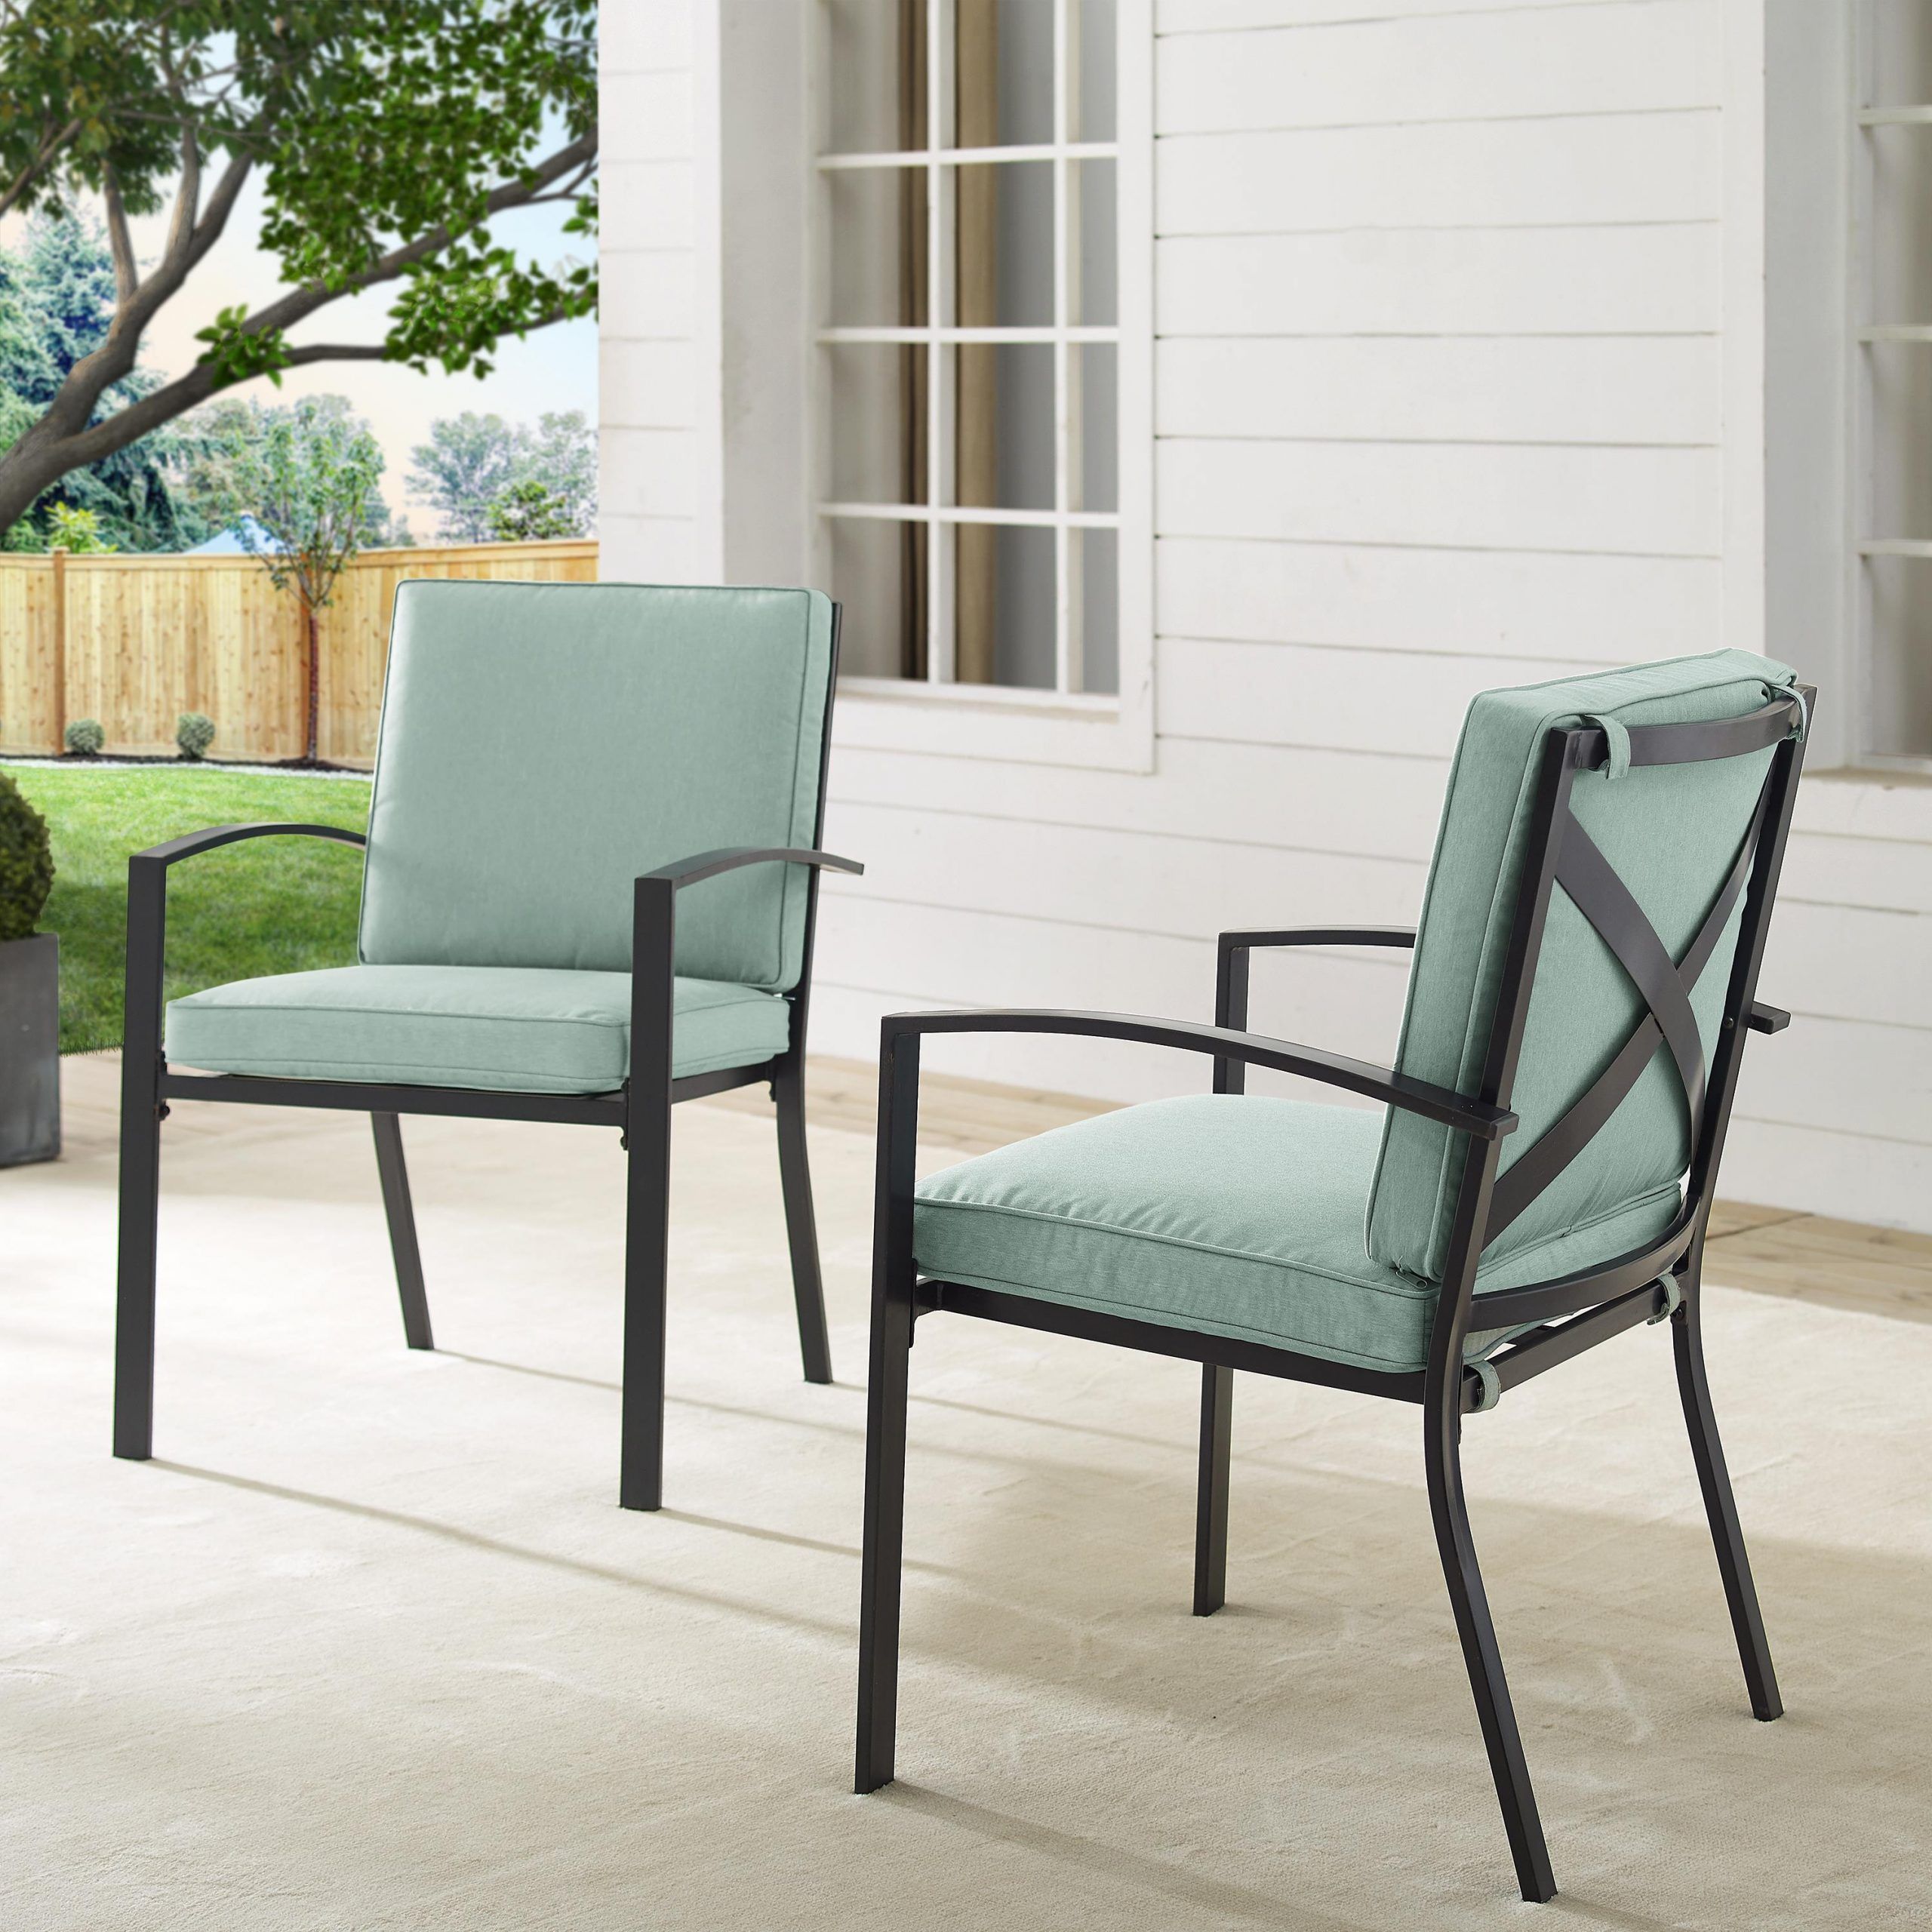 Crosley Kaplan 2Pc Outdoor Dining Chair Set Mist/Oil Rubbed Bronze – 2 Inside Mist Fabric Outdoor Patio Sets (View 1 of 15)